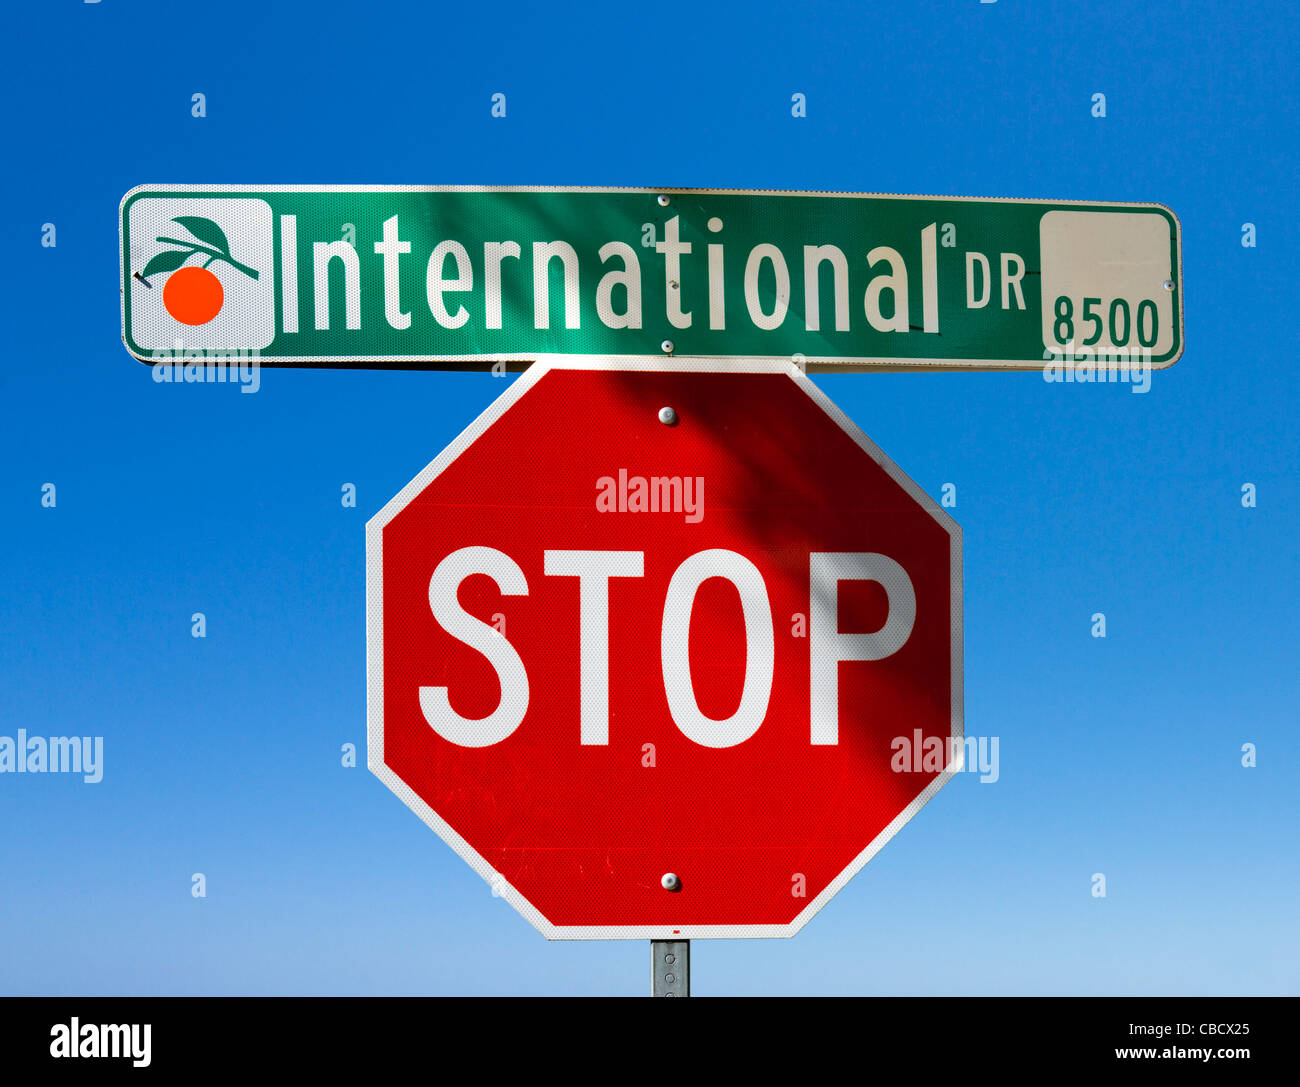 Street and Stop signs, International Drive, Orlando, Central Florida, USA Stock Photo